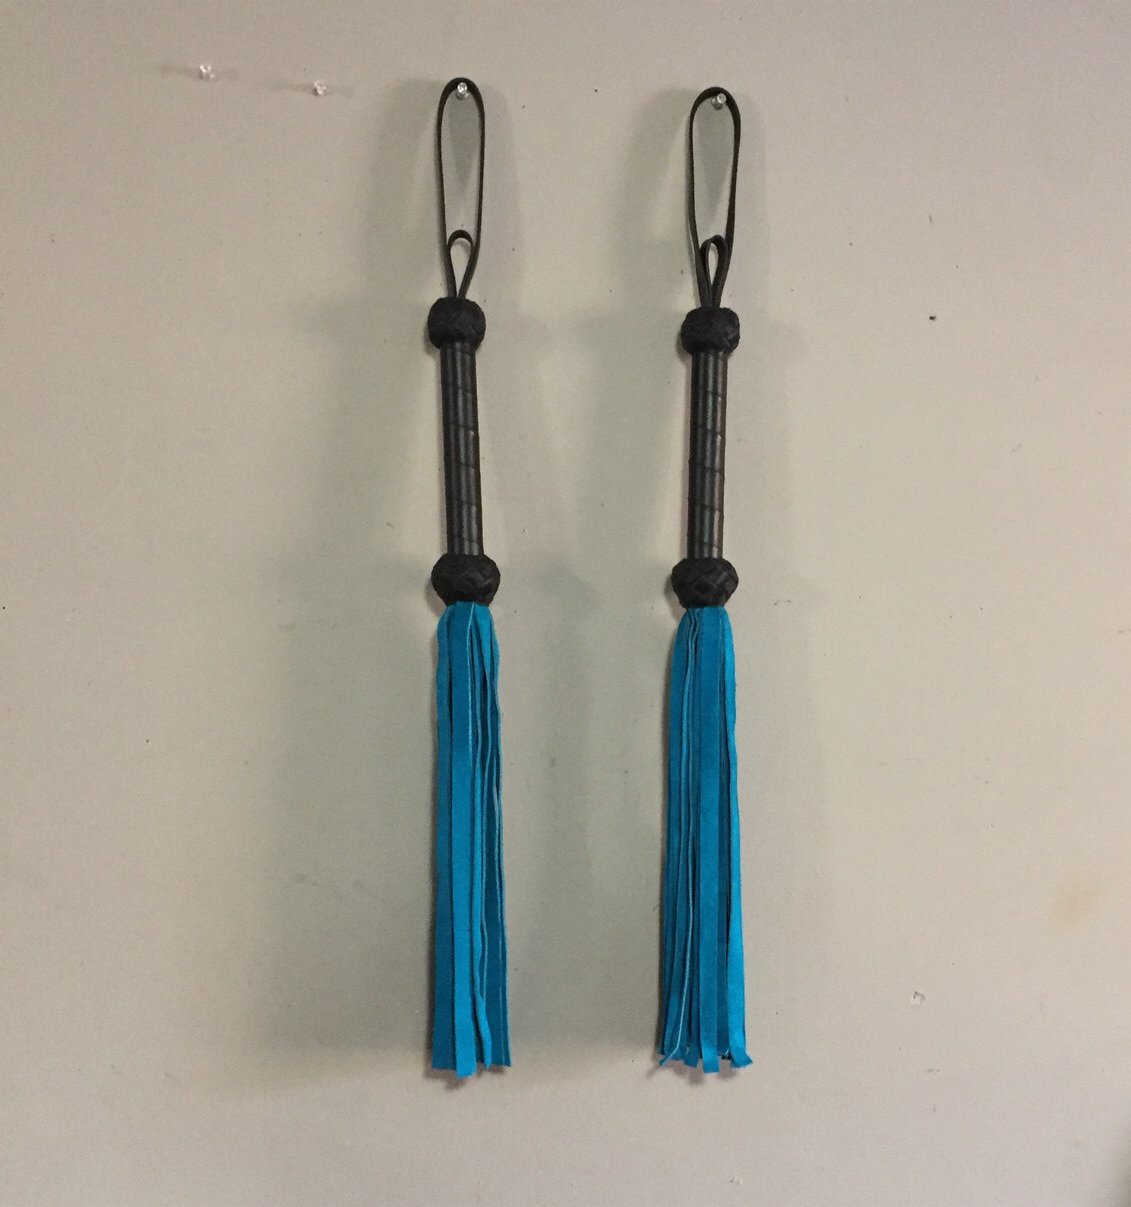 A pair of Teal Basic Suede Floggers.